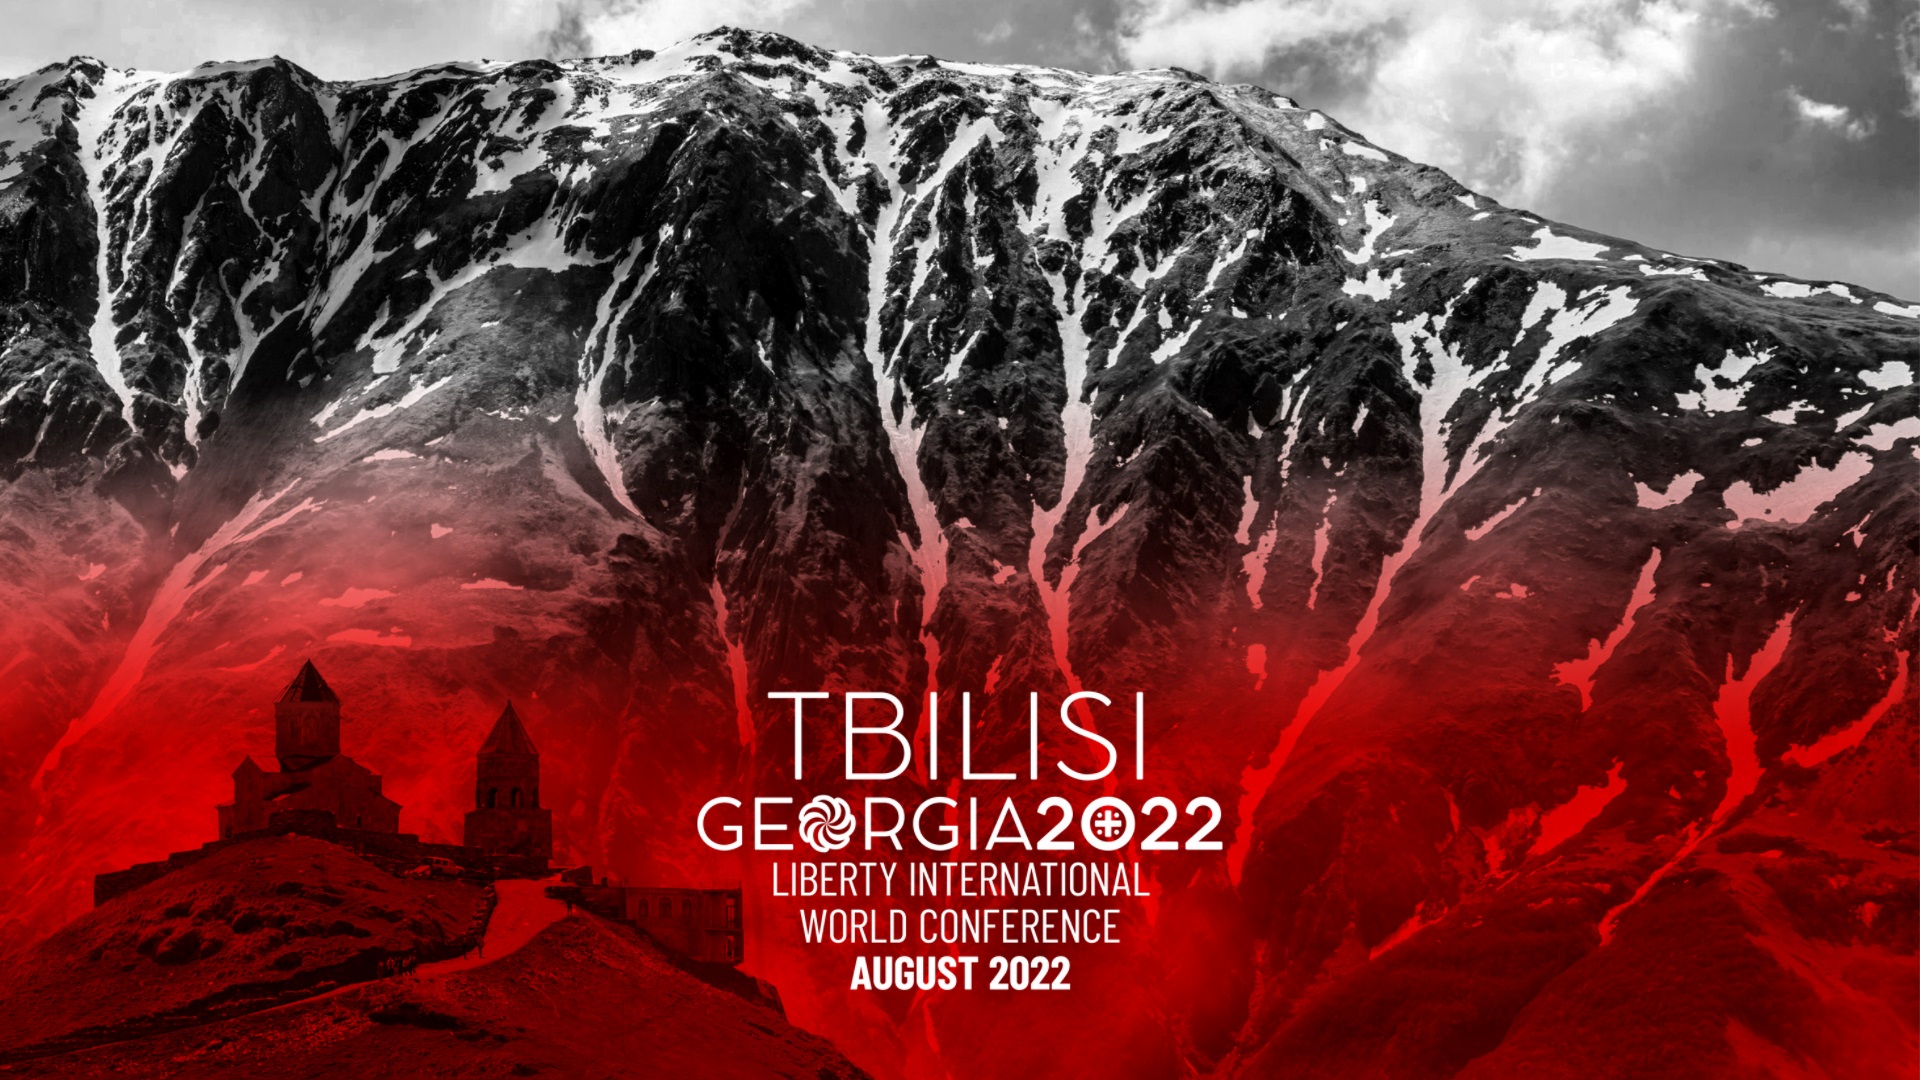 Liberty International World Conference Tbilisi 2022 early bird tickets